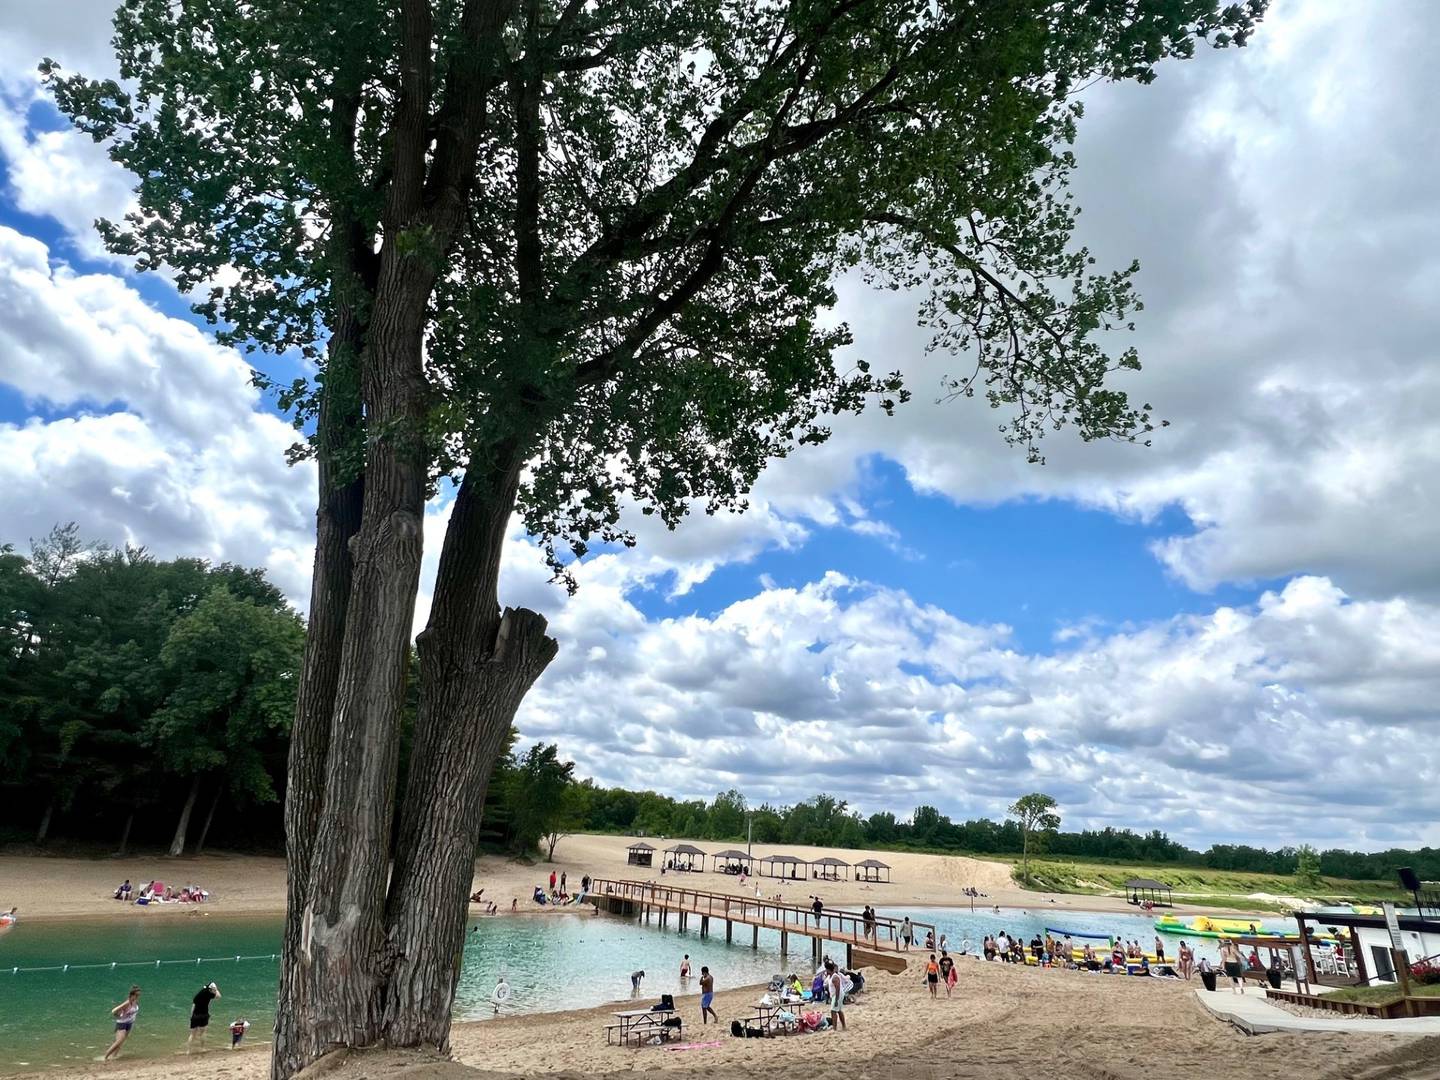 Pearl Lake Beach gets about 50-100 guests on weekdays and 300-1,000 on weekends. There is a clubhouse with a bar and ping pong table, an inflatable waterpark and more at the site.